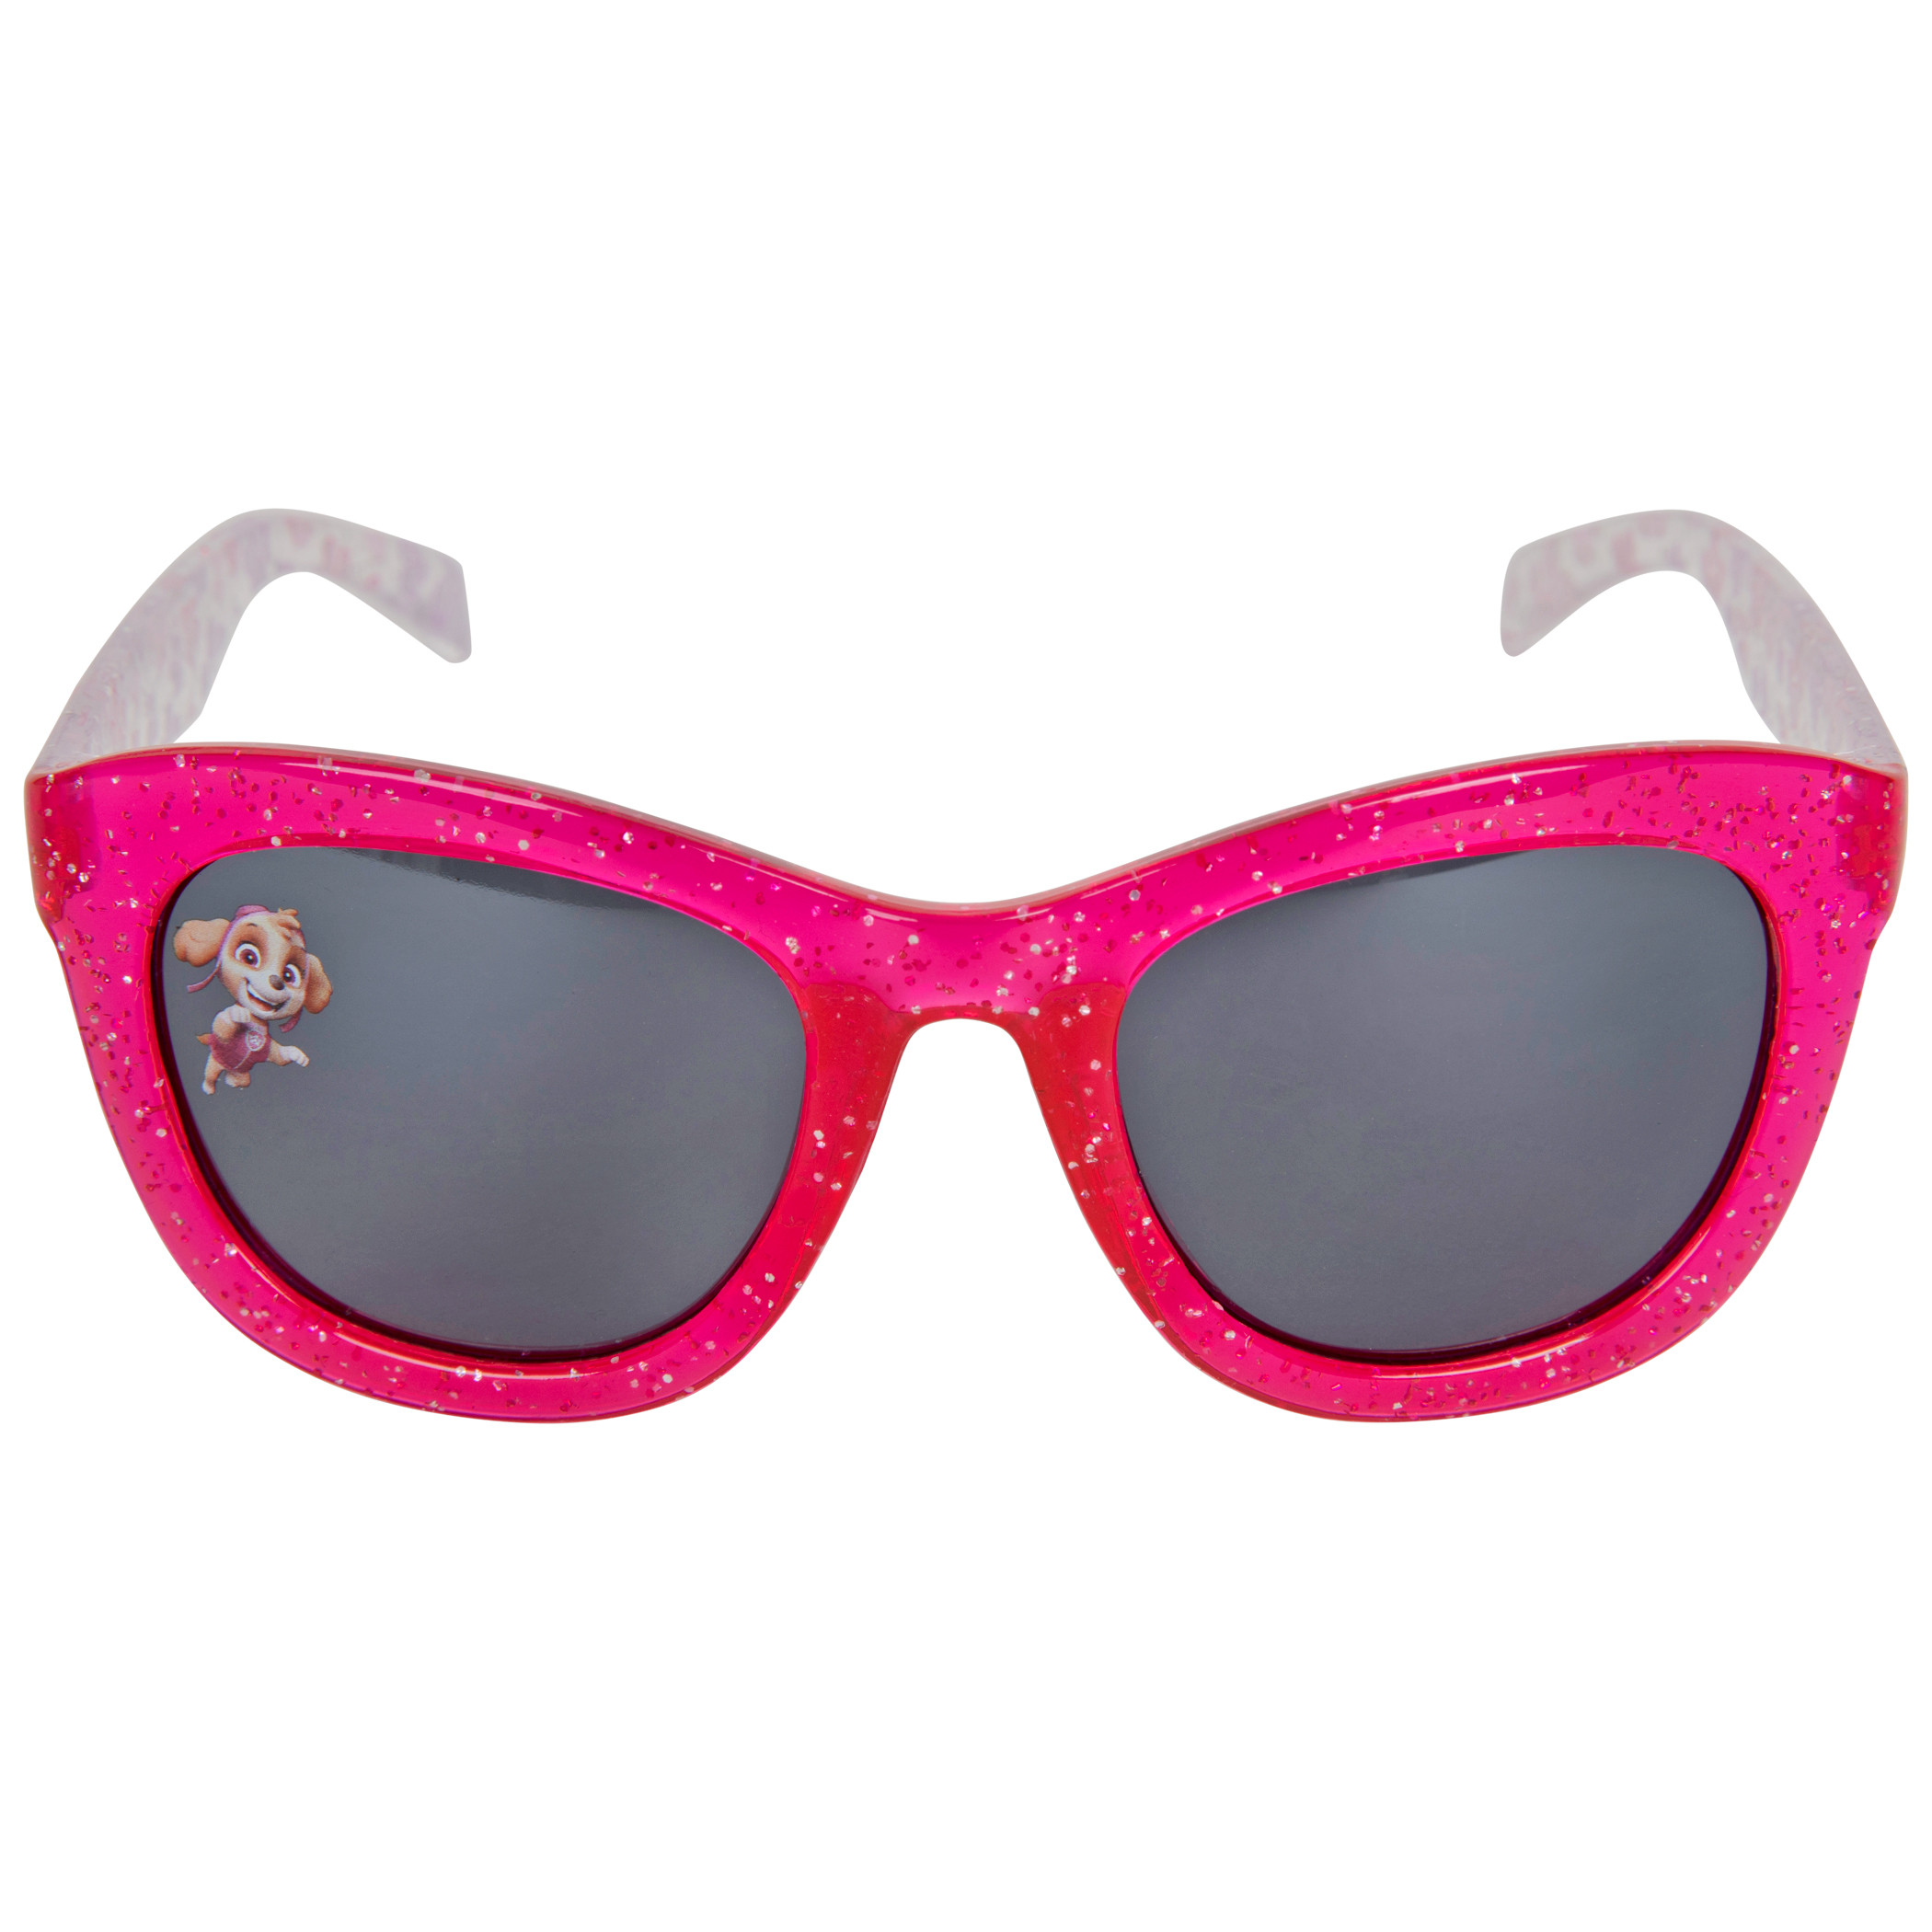 Nickelodeon Paw Patrol Girls Sunglasses w/ Handle Carrier Pouch